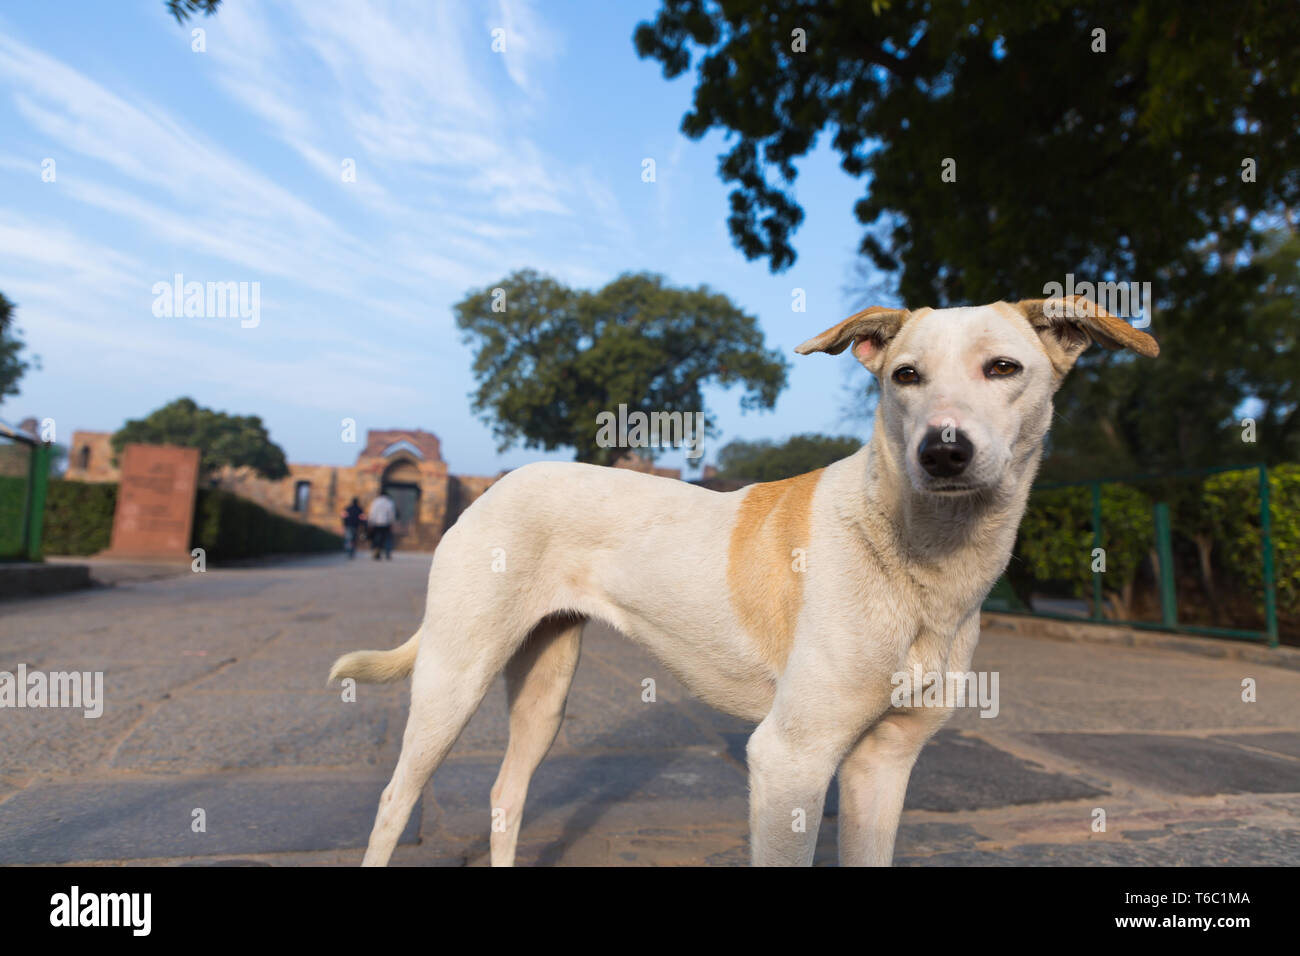 Dramatic portrait of an Indian street dog in the early morning Stock Photo